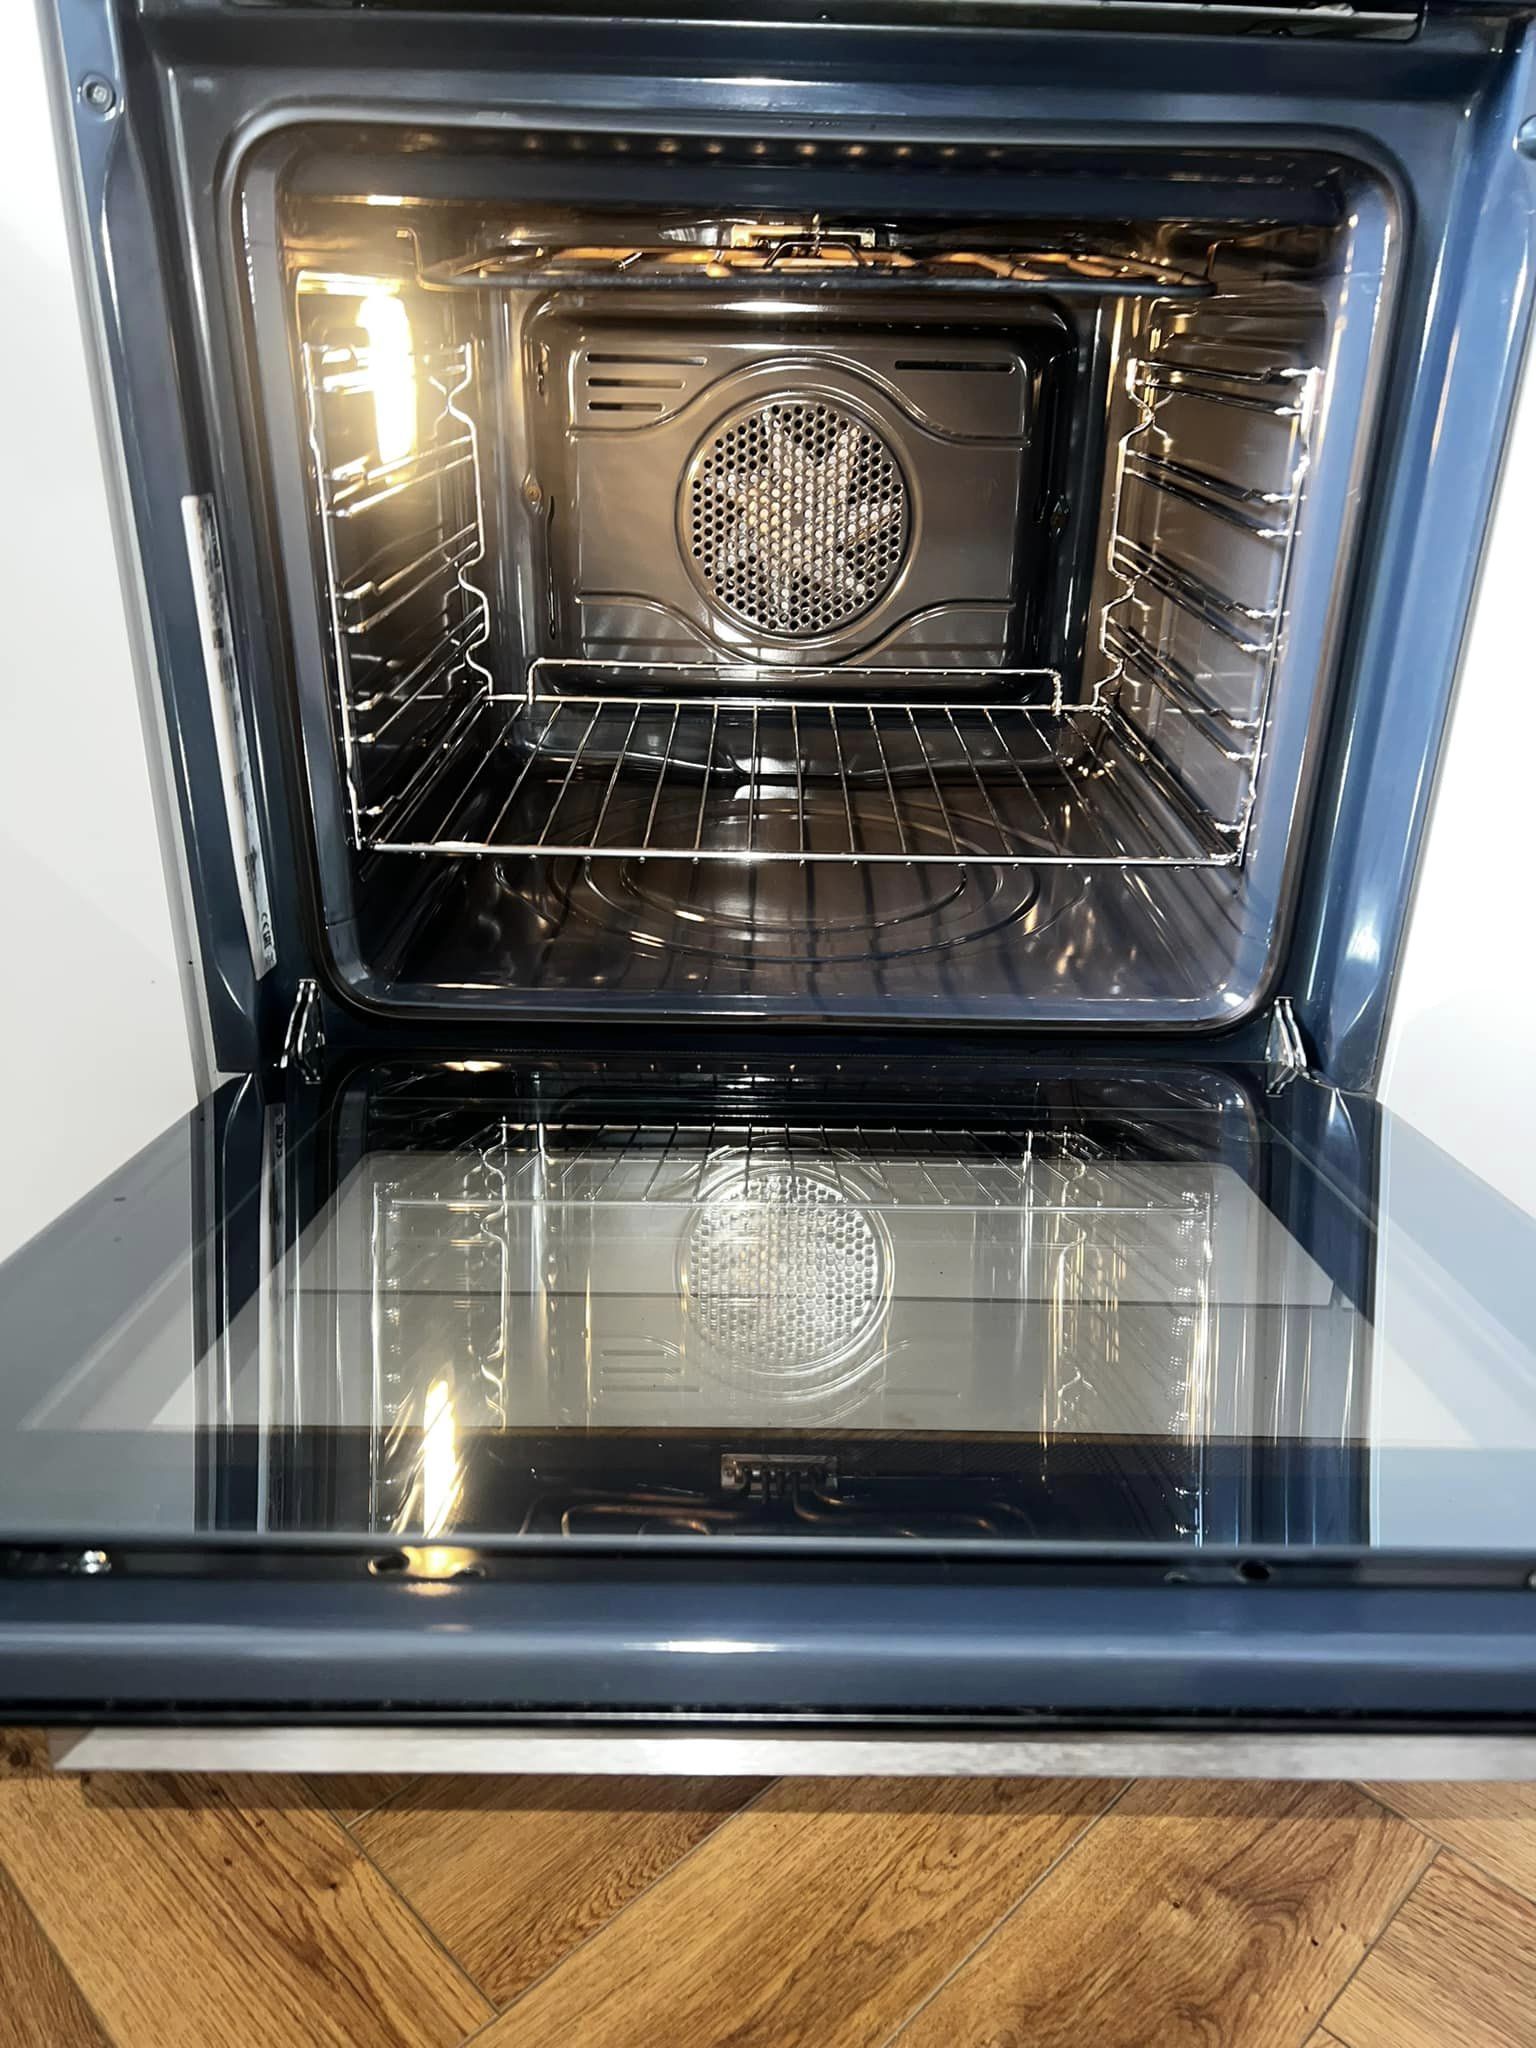 professional oven cleaner